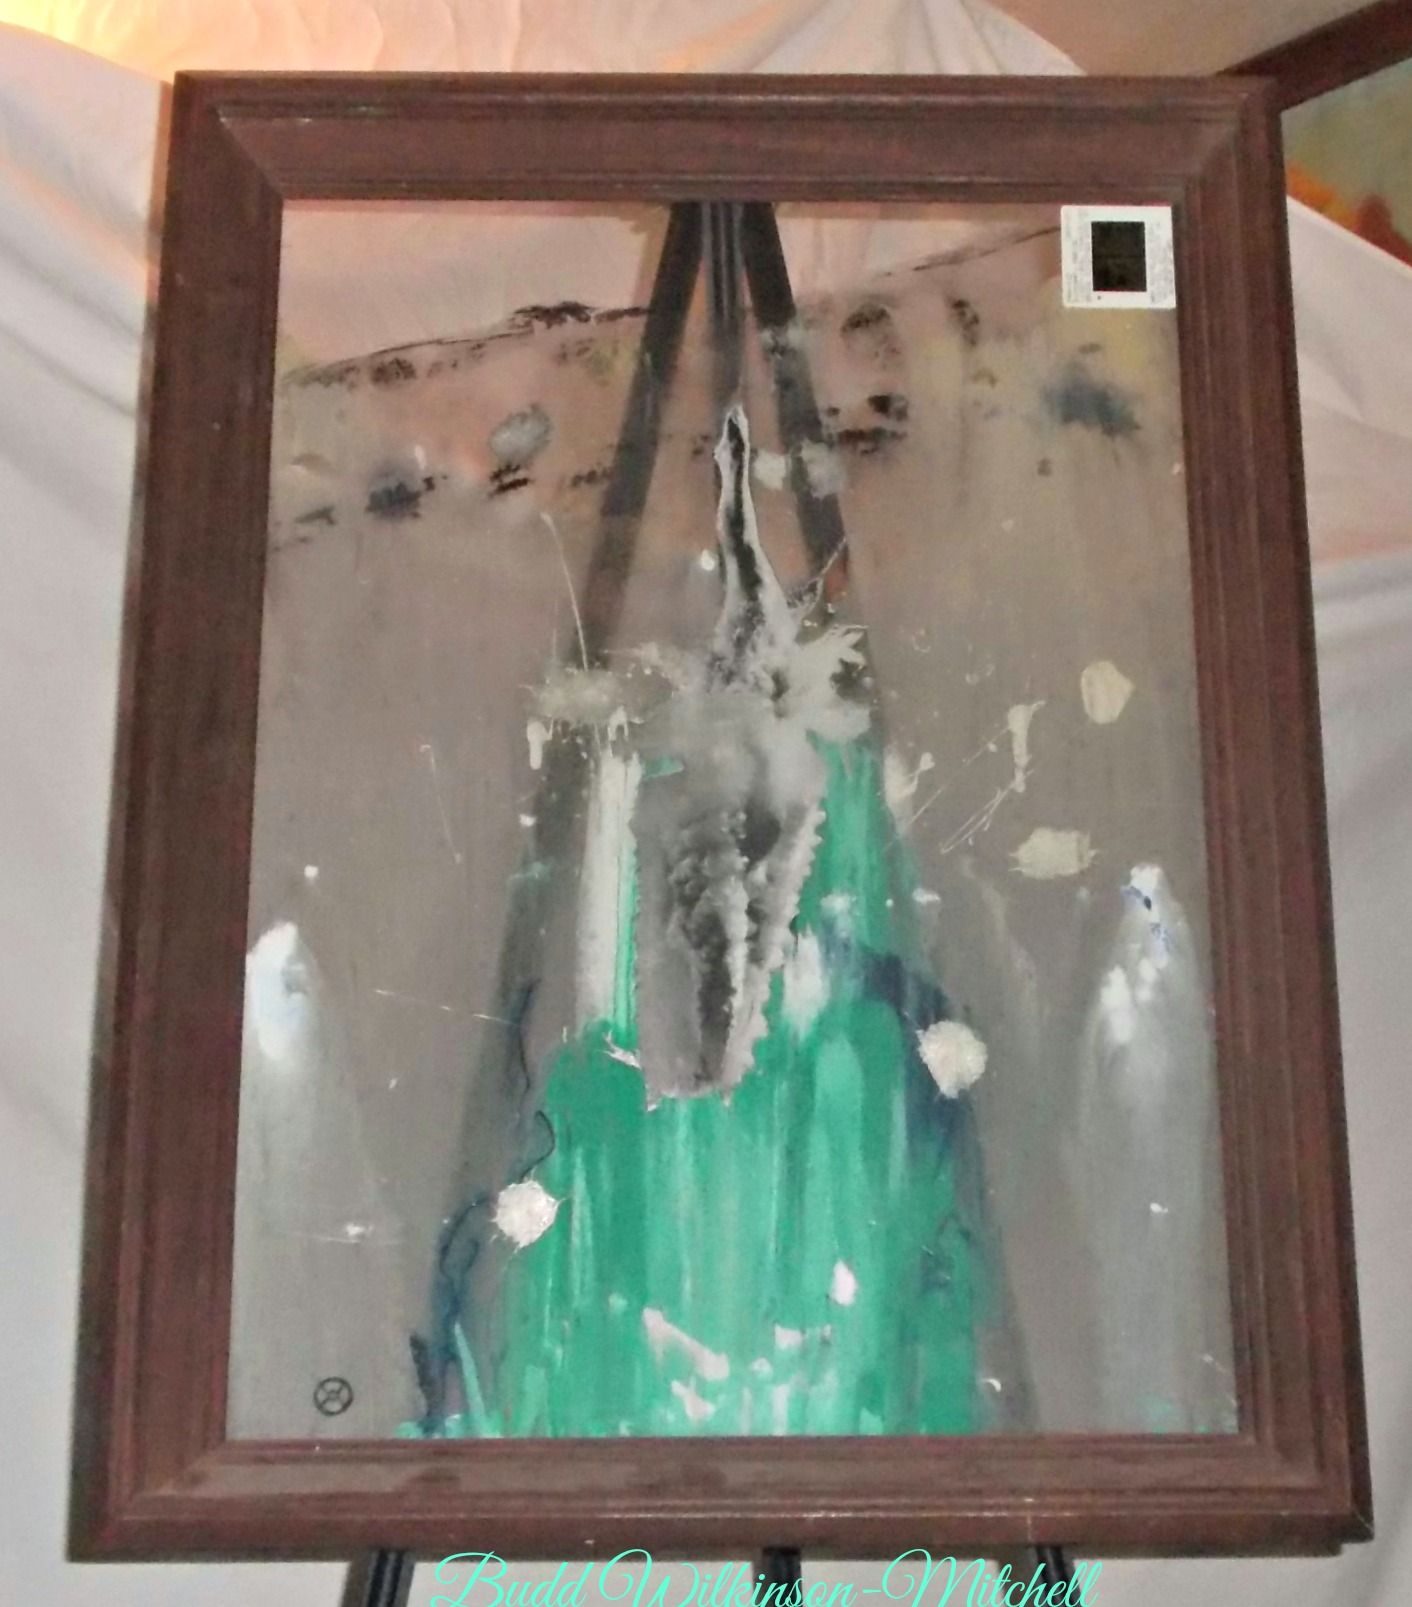 Dive 2012 22x16 Inch Mixed Media on Glass in Artist's Frame.jpg